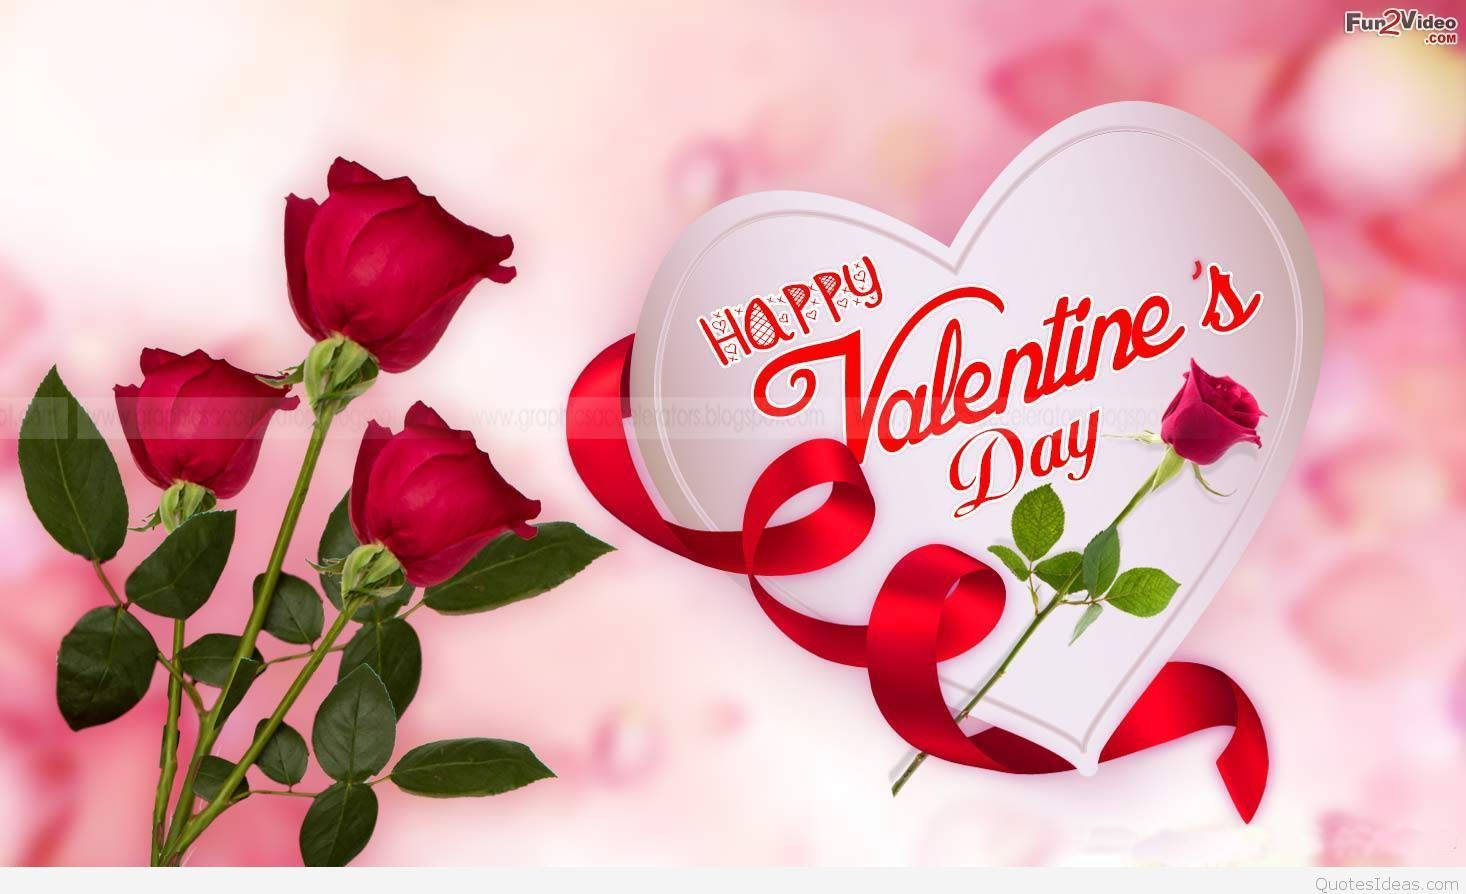 Cute Valentine's Day Red Roses Wallpaper